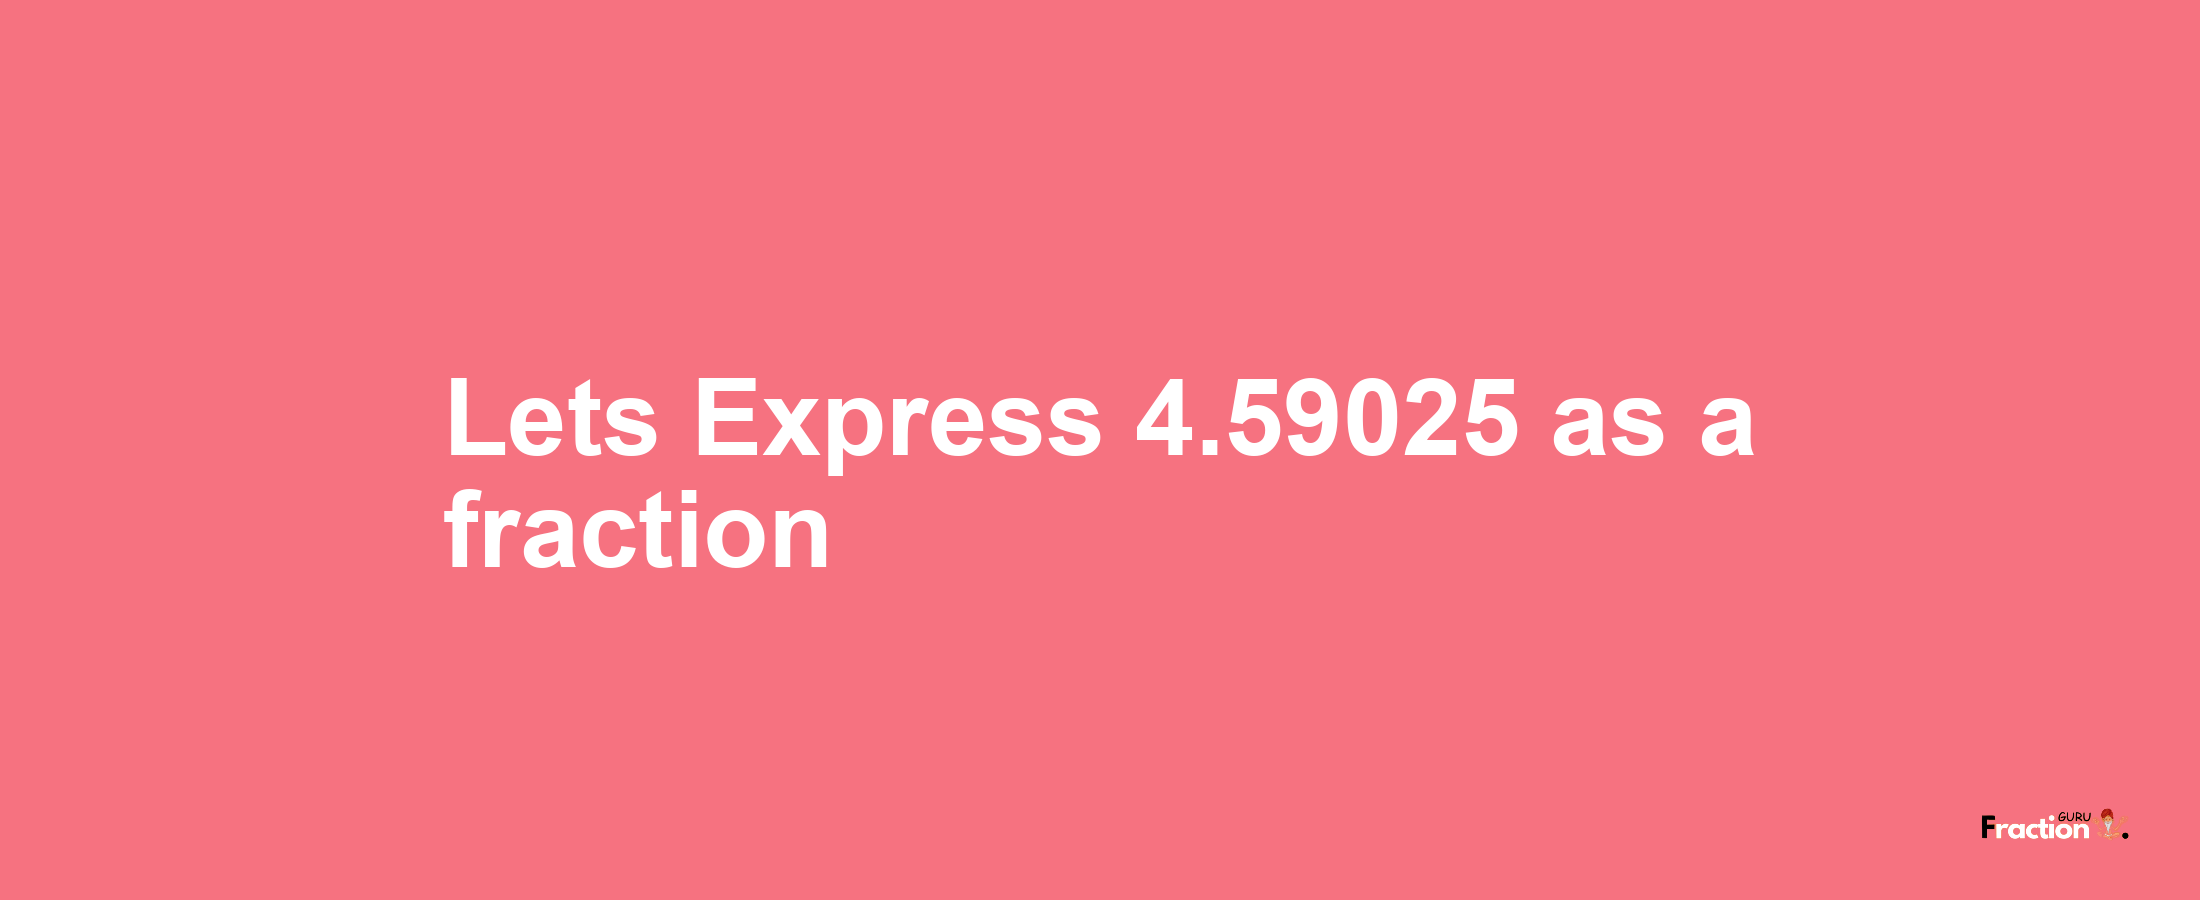 Lets Express 4.59025 as afraction